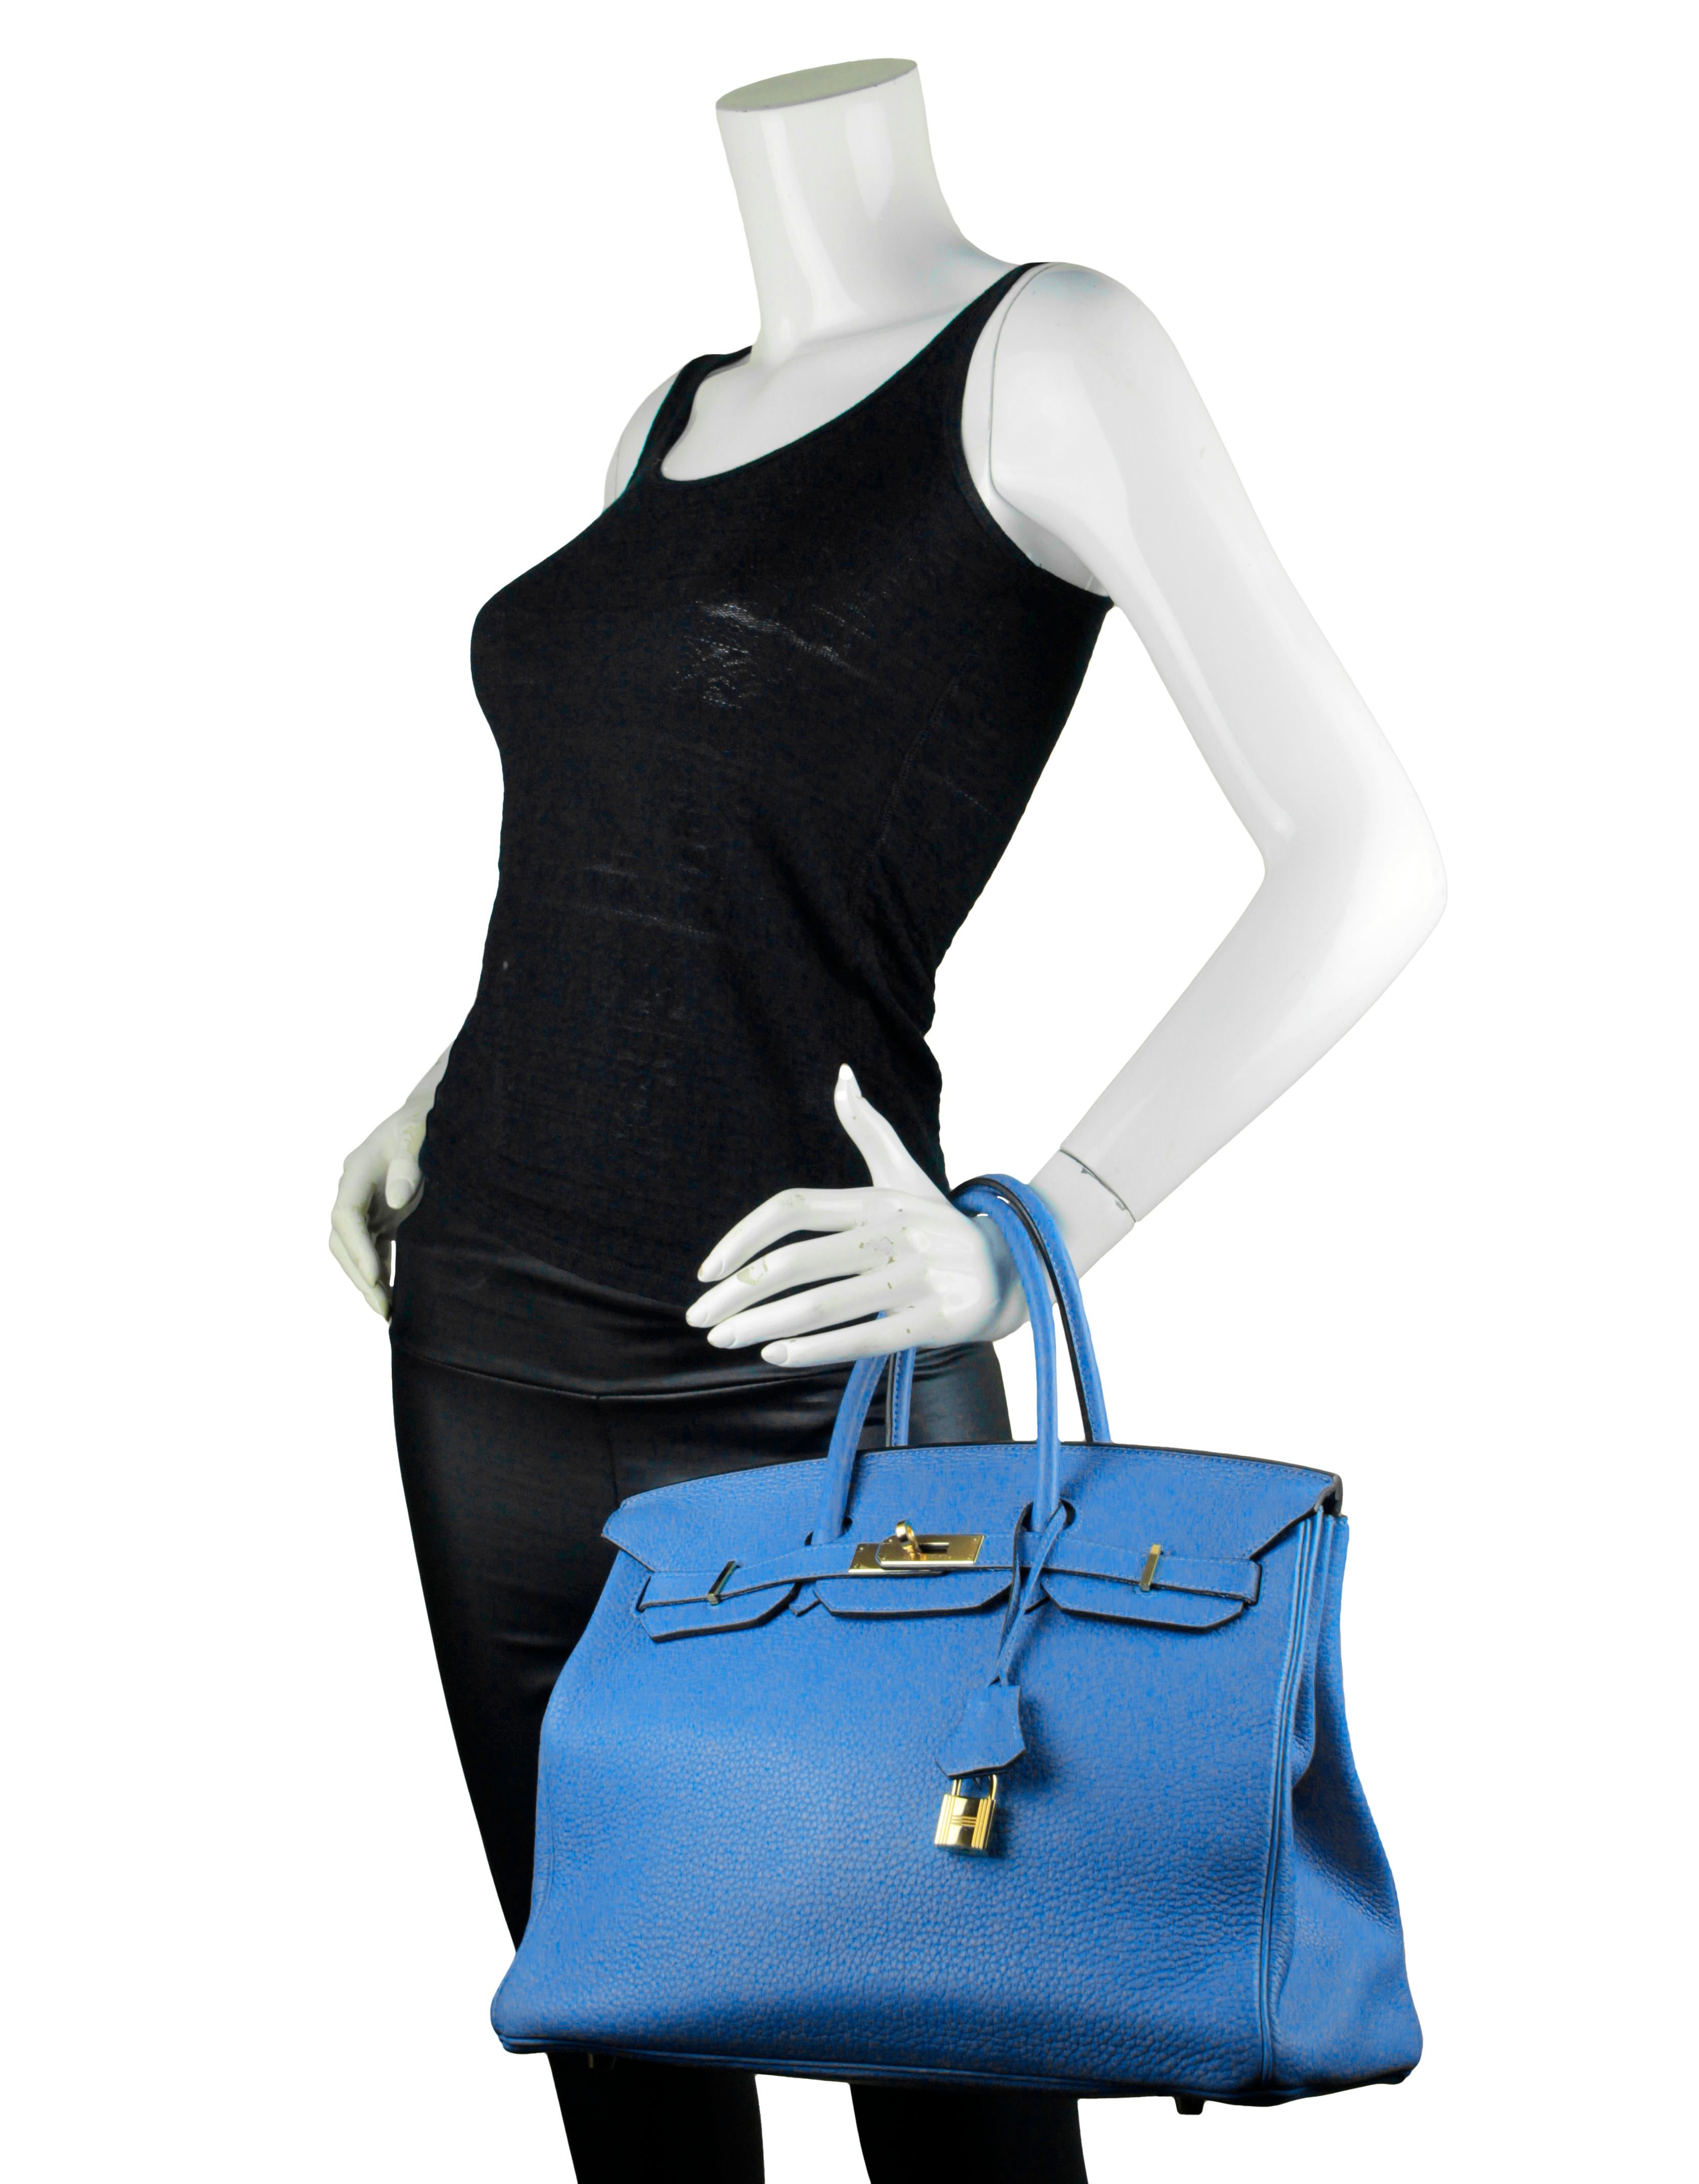 Hermes Bleu Paradis Taurillon Clemence Leather 35cm Birkin Bag

Made In: France
Year of Production: 2014
Color: Blue paradis
Hardware: Goldtone
Materials: Taurillon clemence leather
Lining: Chevre leather
Closure/Opening: Double arm strap with twist